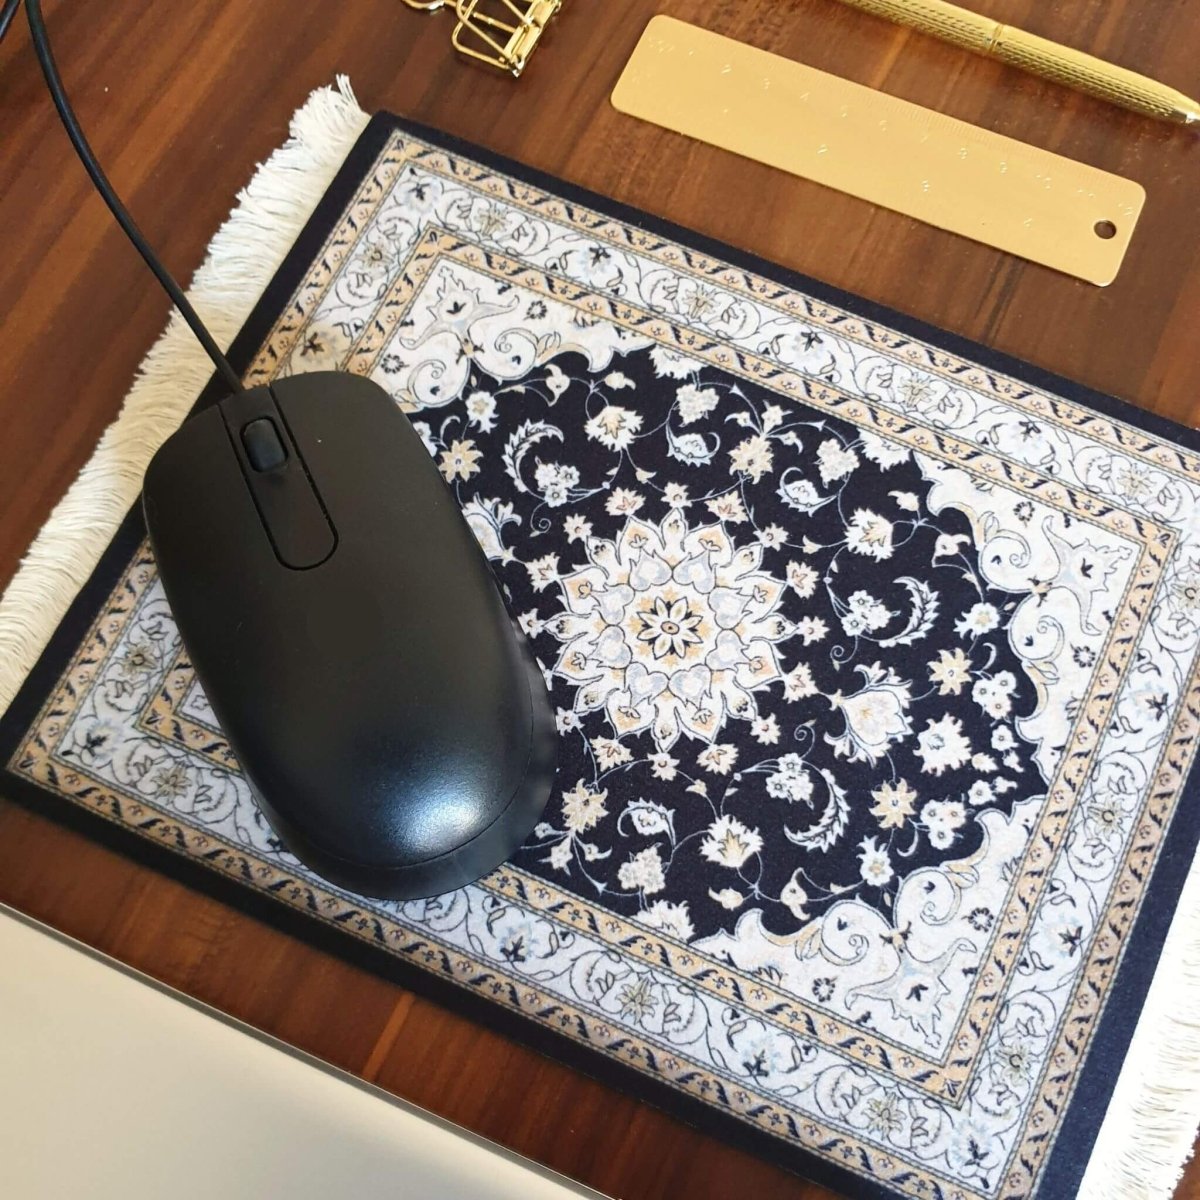 Bohemian rug mouse pad in neutral shades on desk with mouse on it